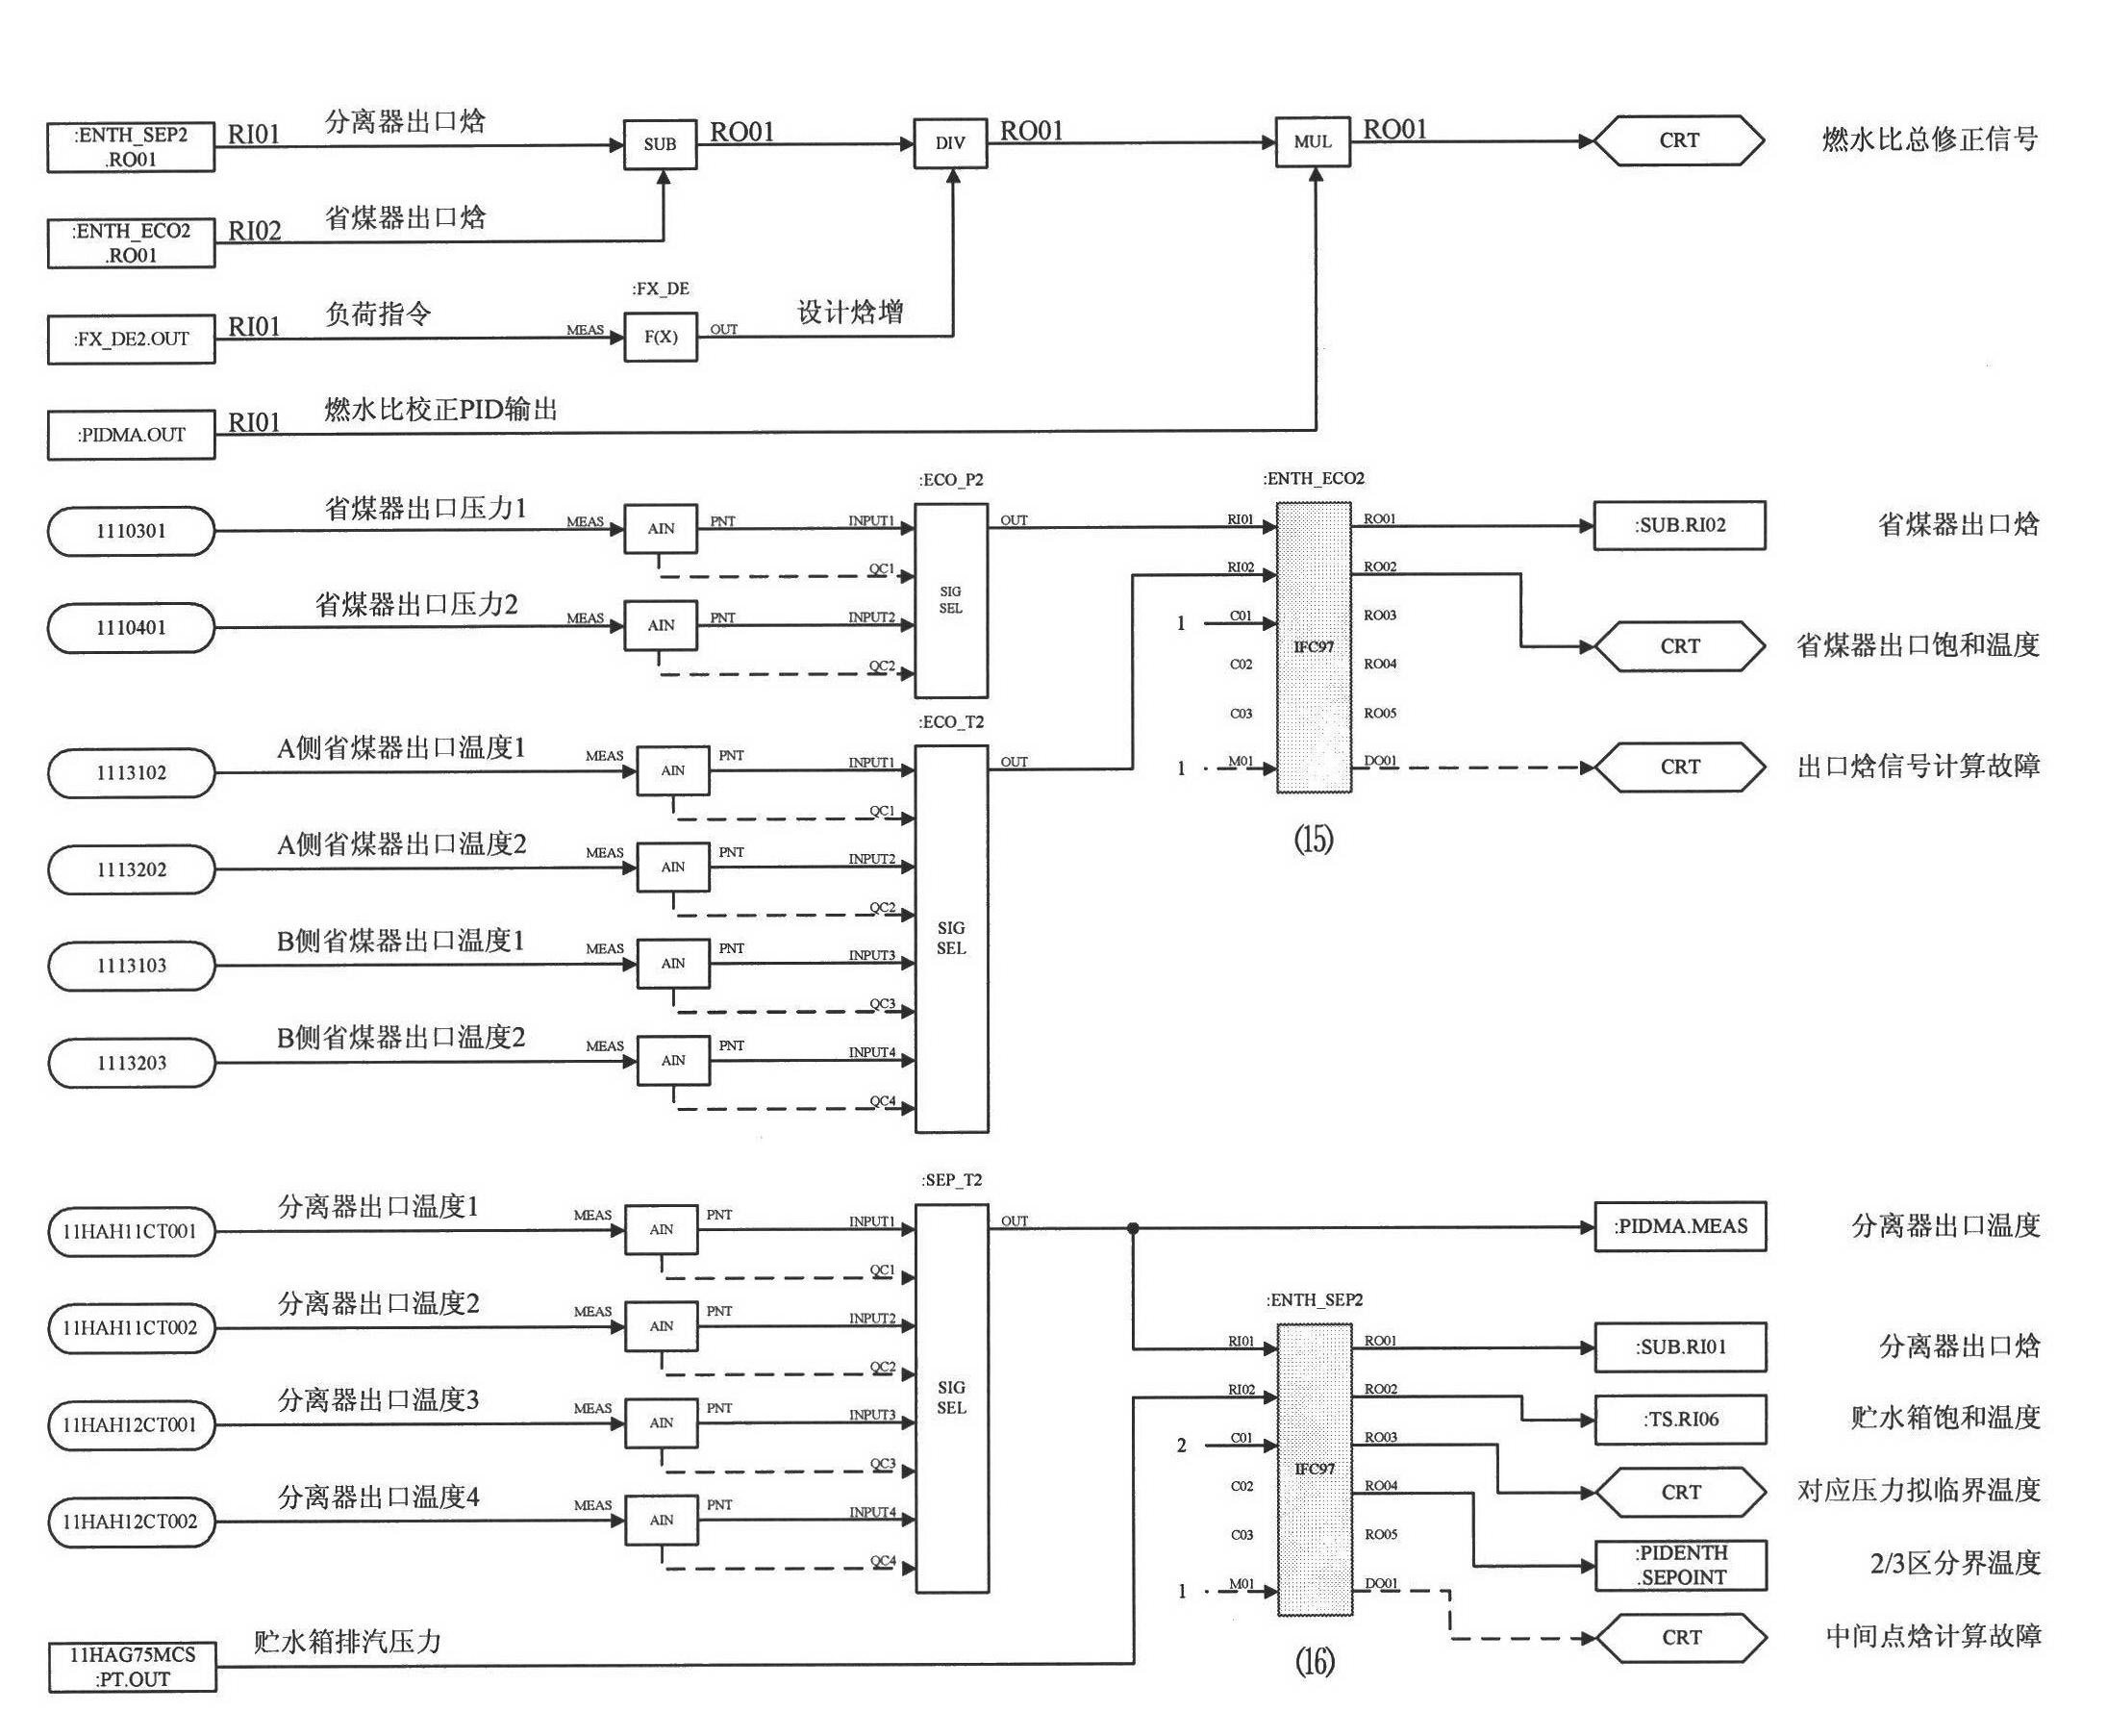 Real-time control algorithm of International Association for the Properties of Water and Steam (IAPWS)-IF 97 based on thermal properties of water and steam